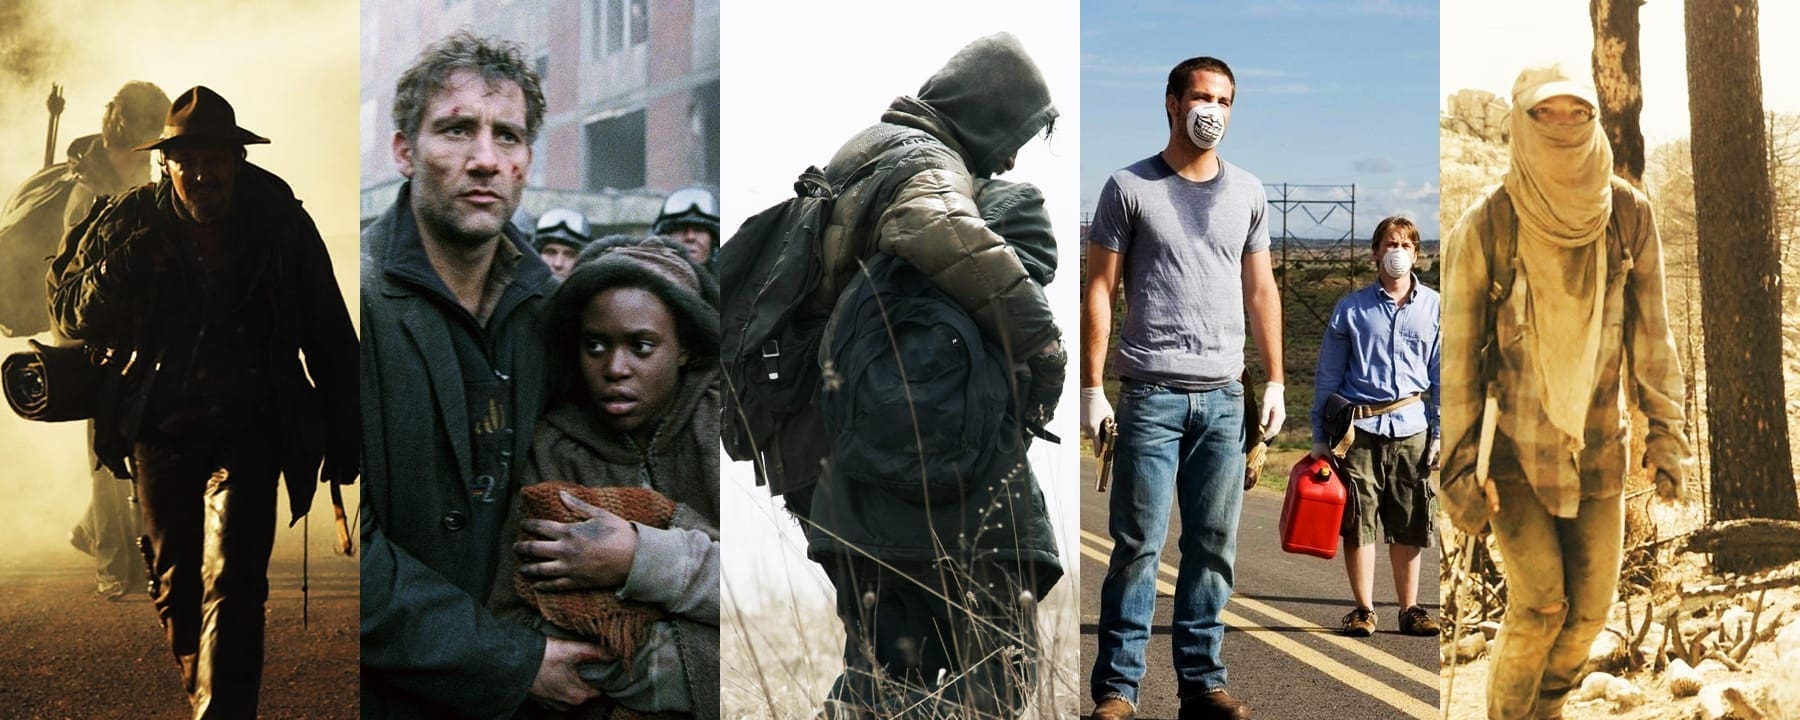 Carriers, Children of Men, fiction, film, Hell, movie, post apocalyptic, sci-fi, Stake Land, The Road, Turbo